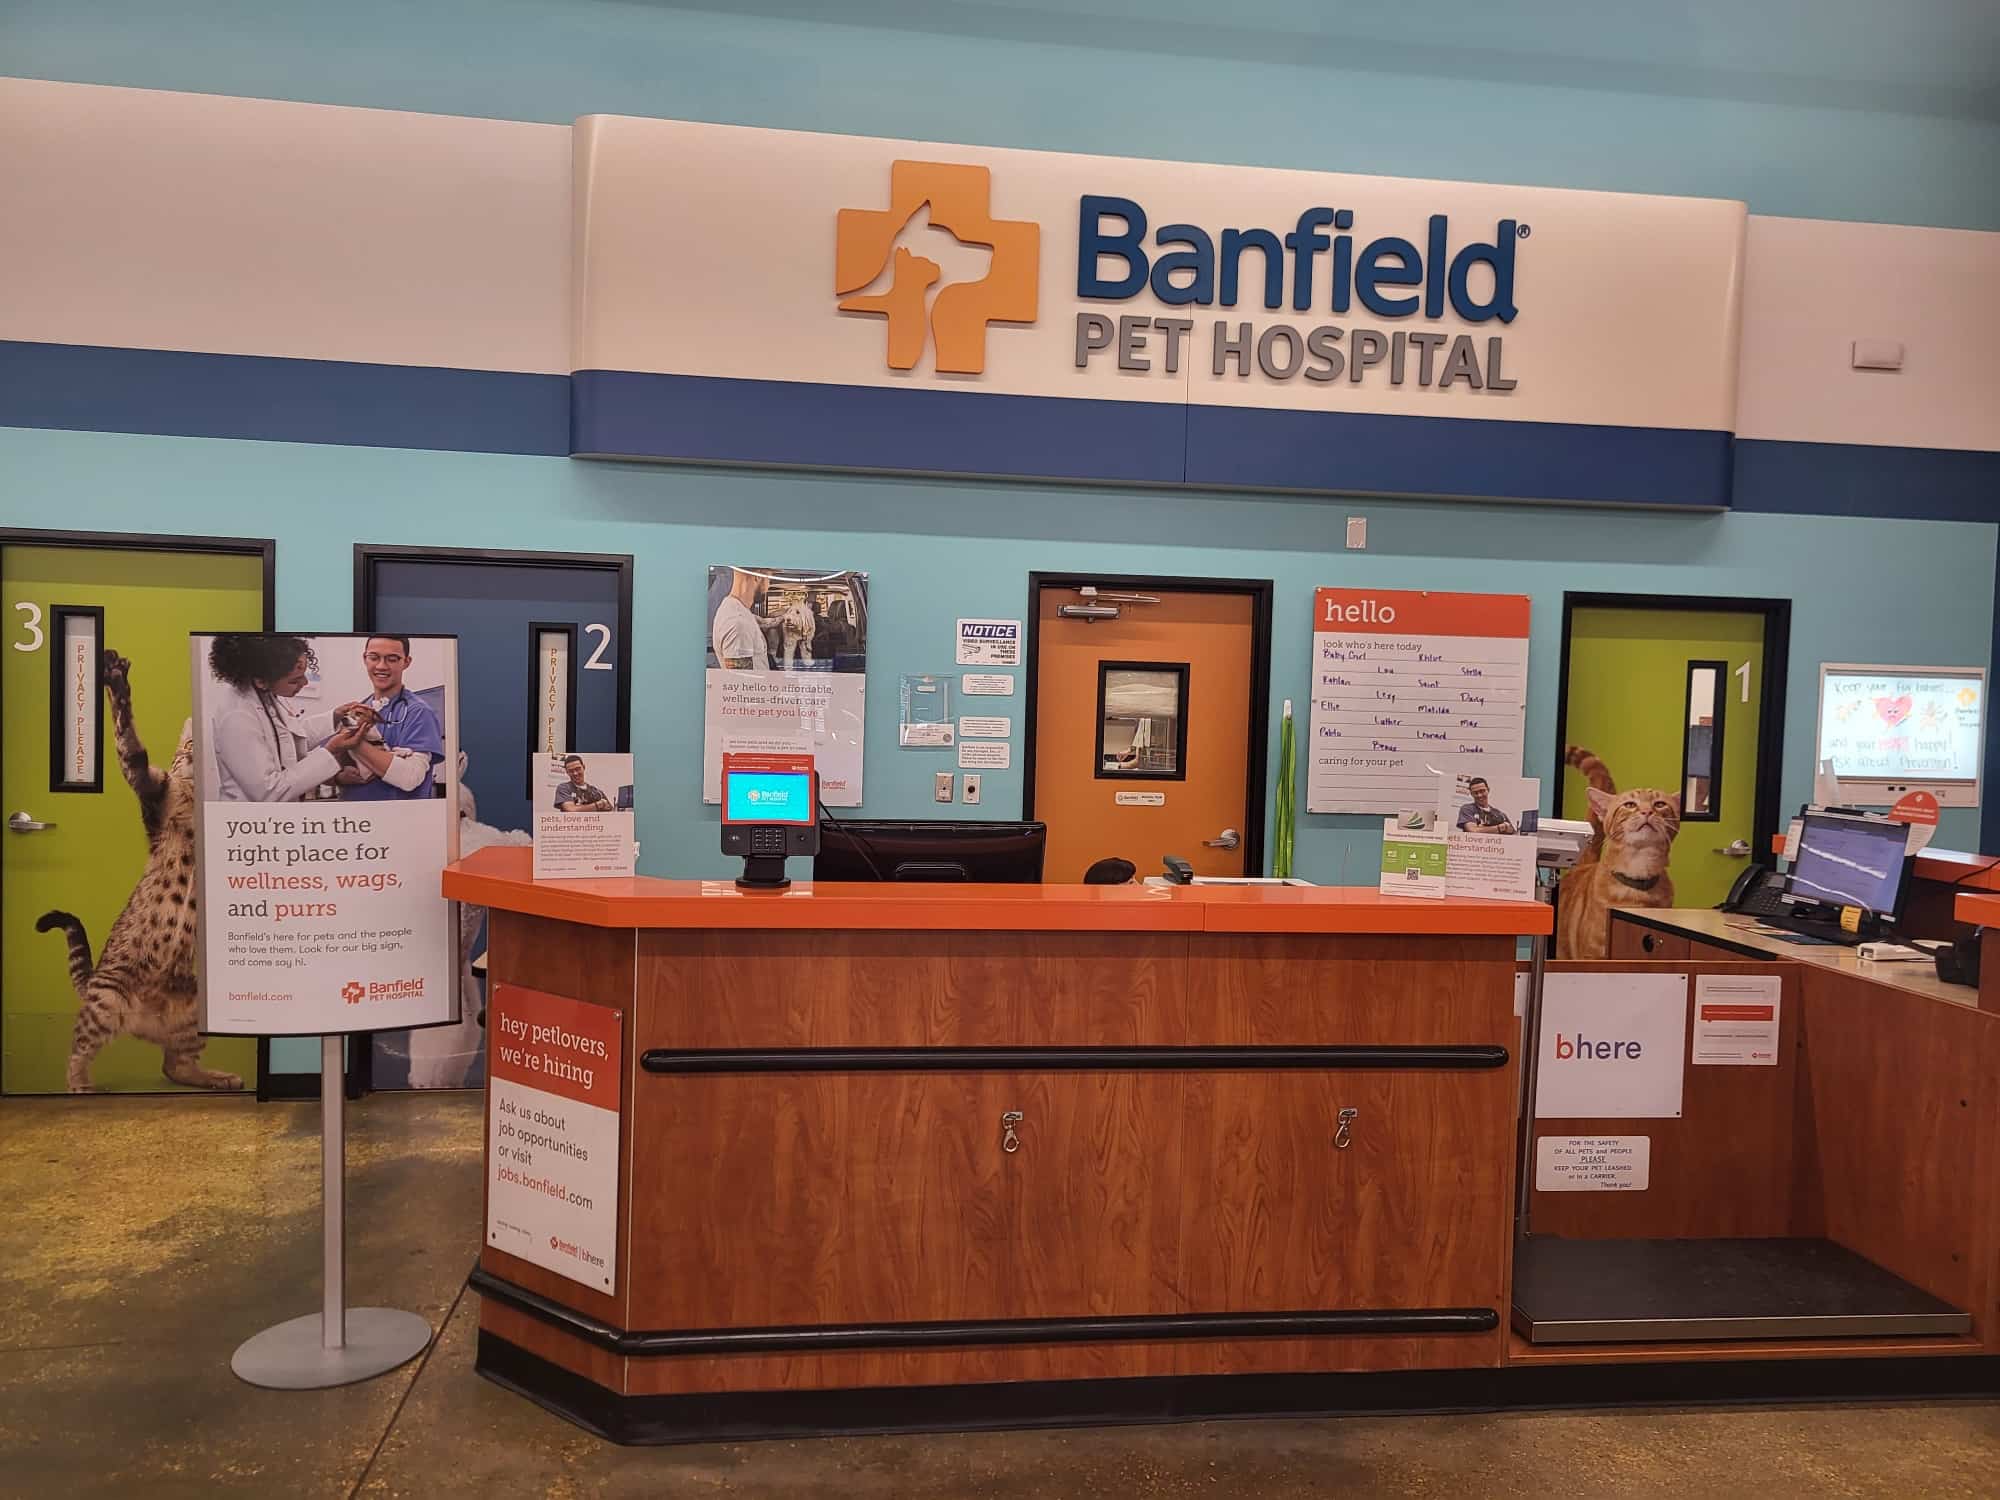 The front desk and lobby of the Elmwood location